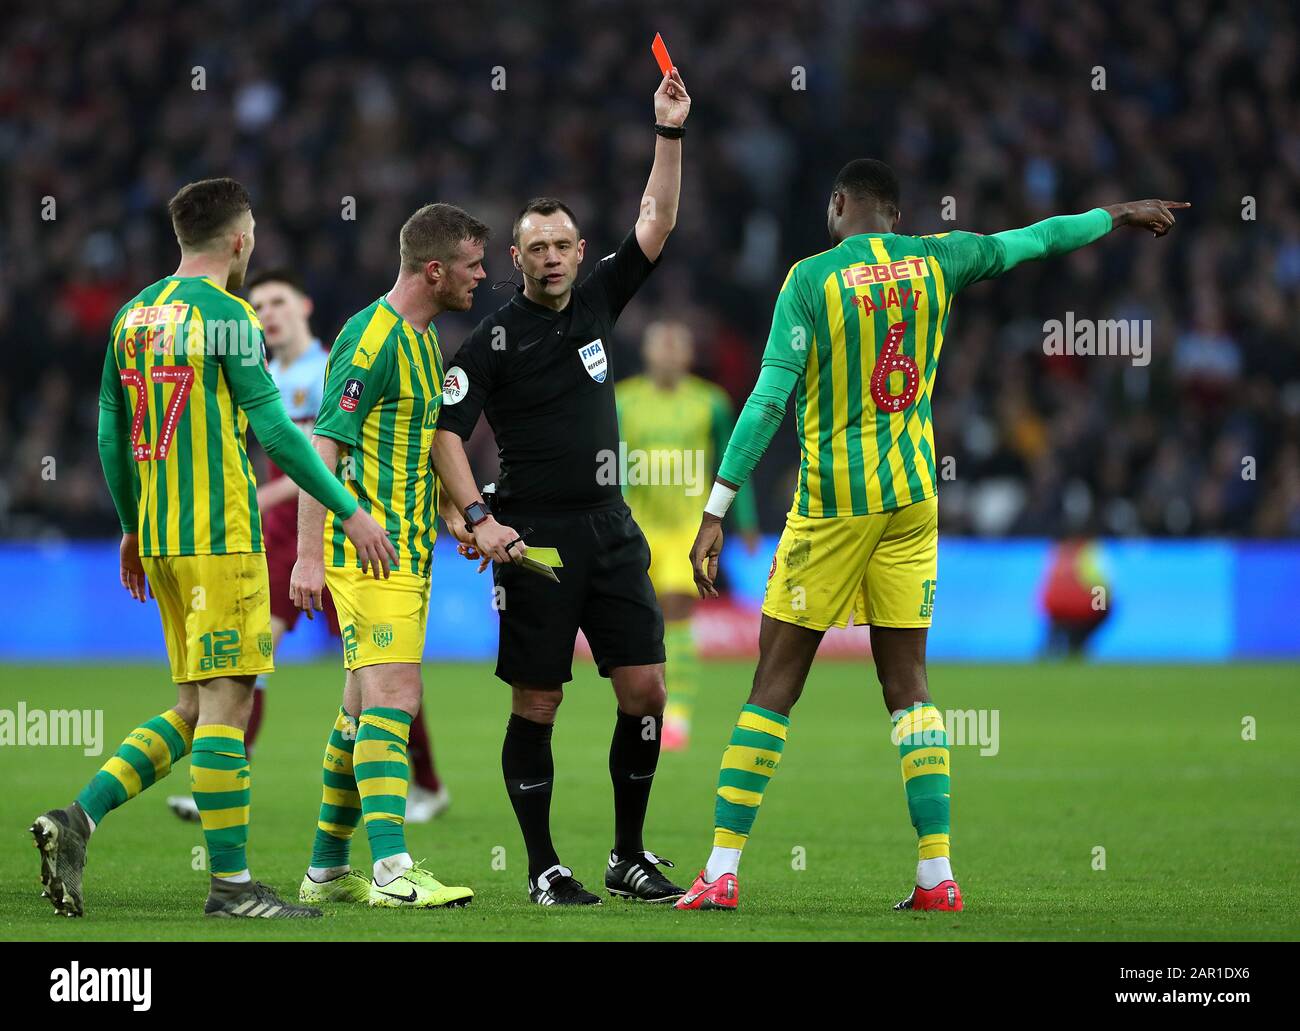 West Bromwich Albion's Semi Ajayi is shown a red card by referee Stuart Attwell after picking up a second booking during the FA Cup fourth round match at the London Stadium. Stock Photo